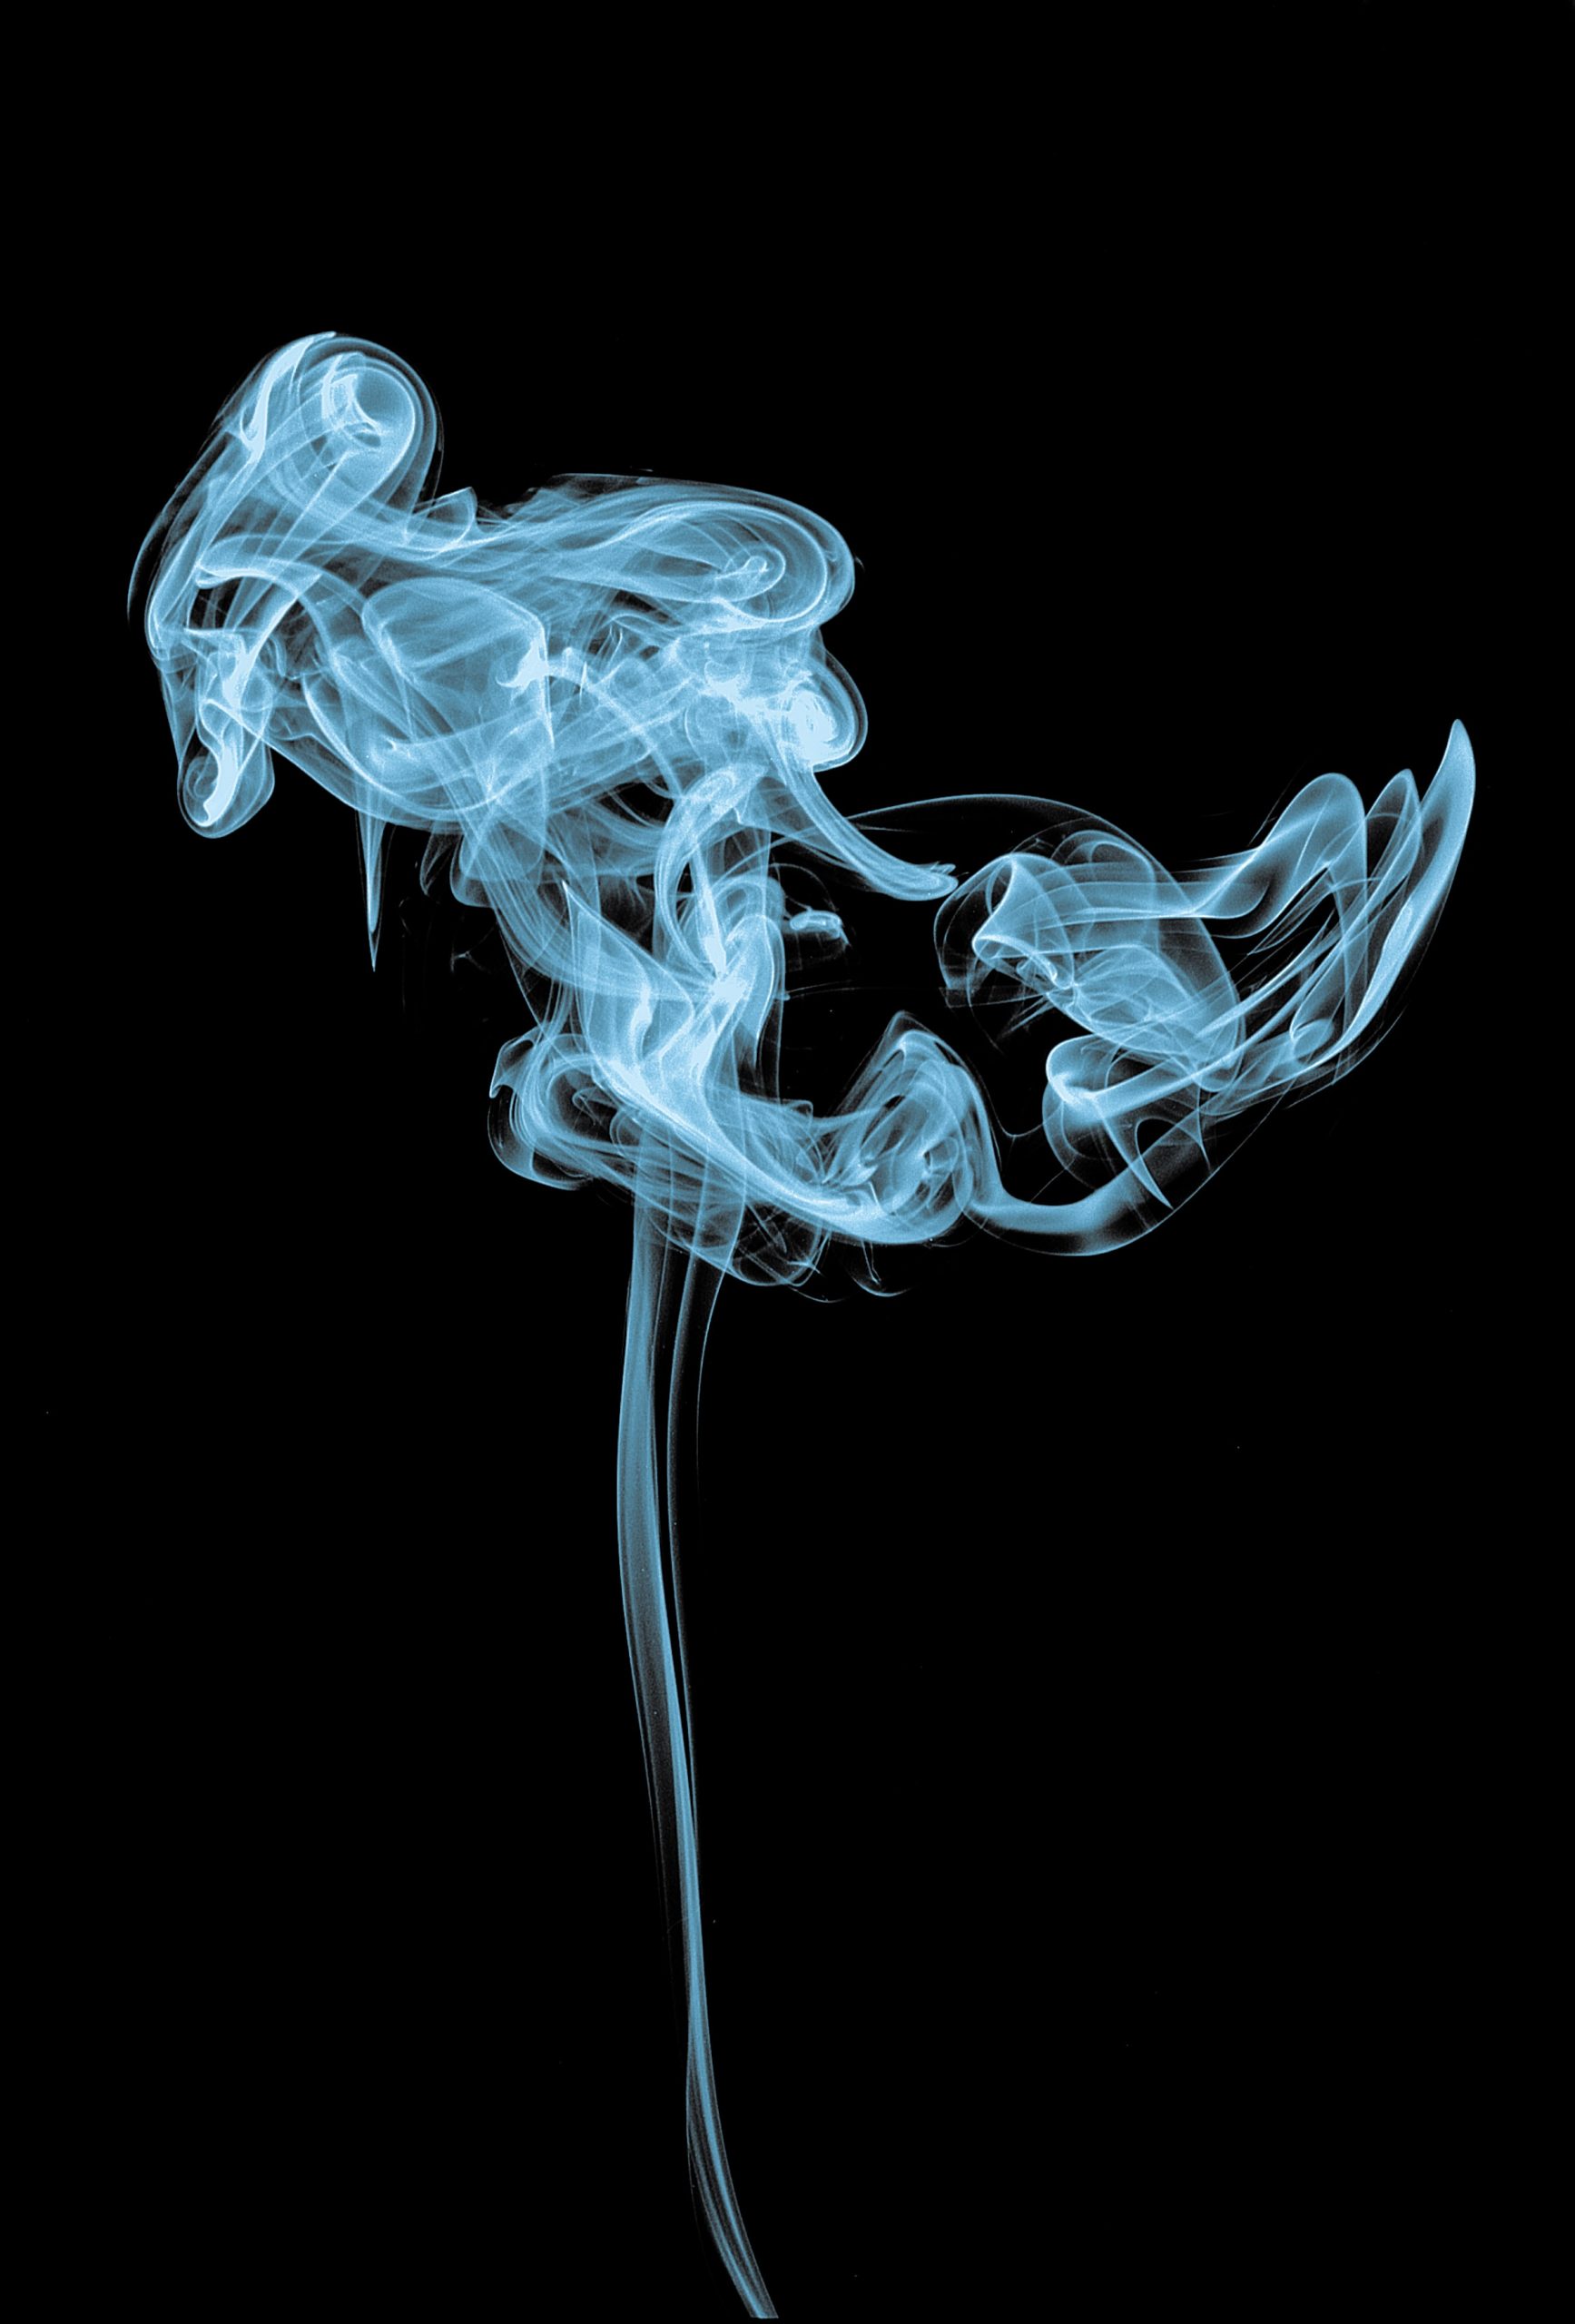 Covid-19 has M & A Deals Up in Smoke!…and That’s a Good Thing!